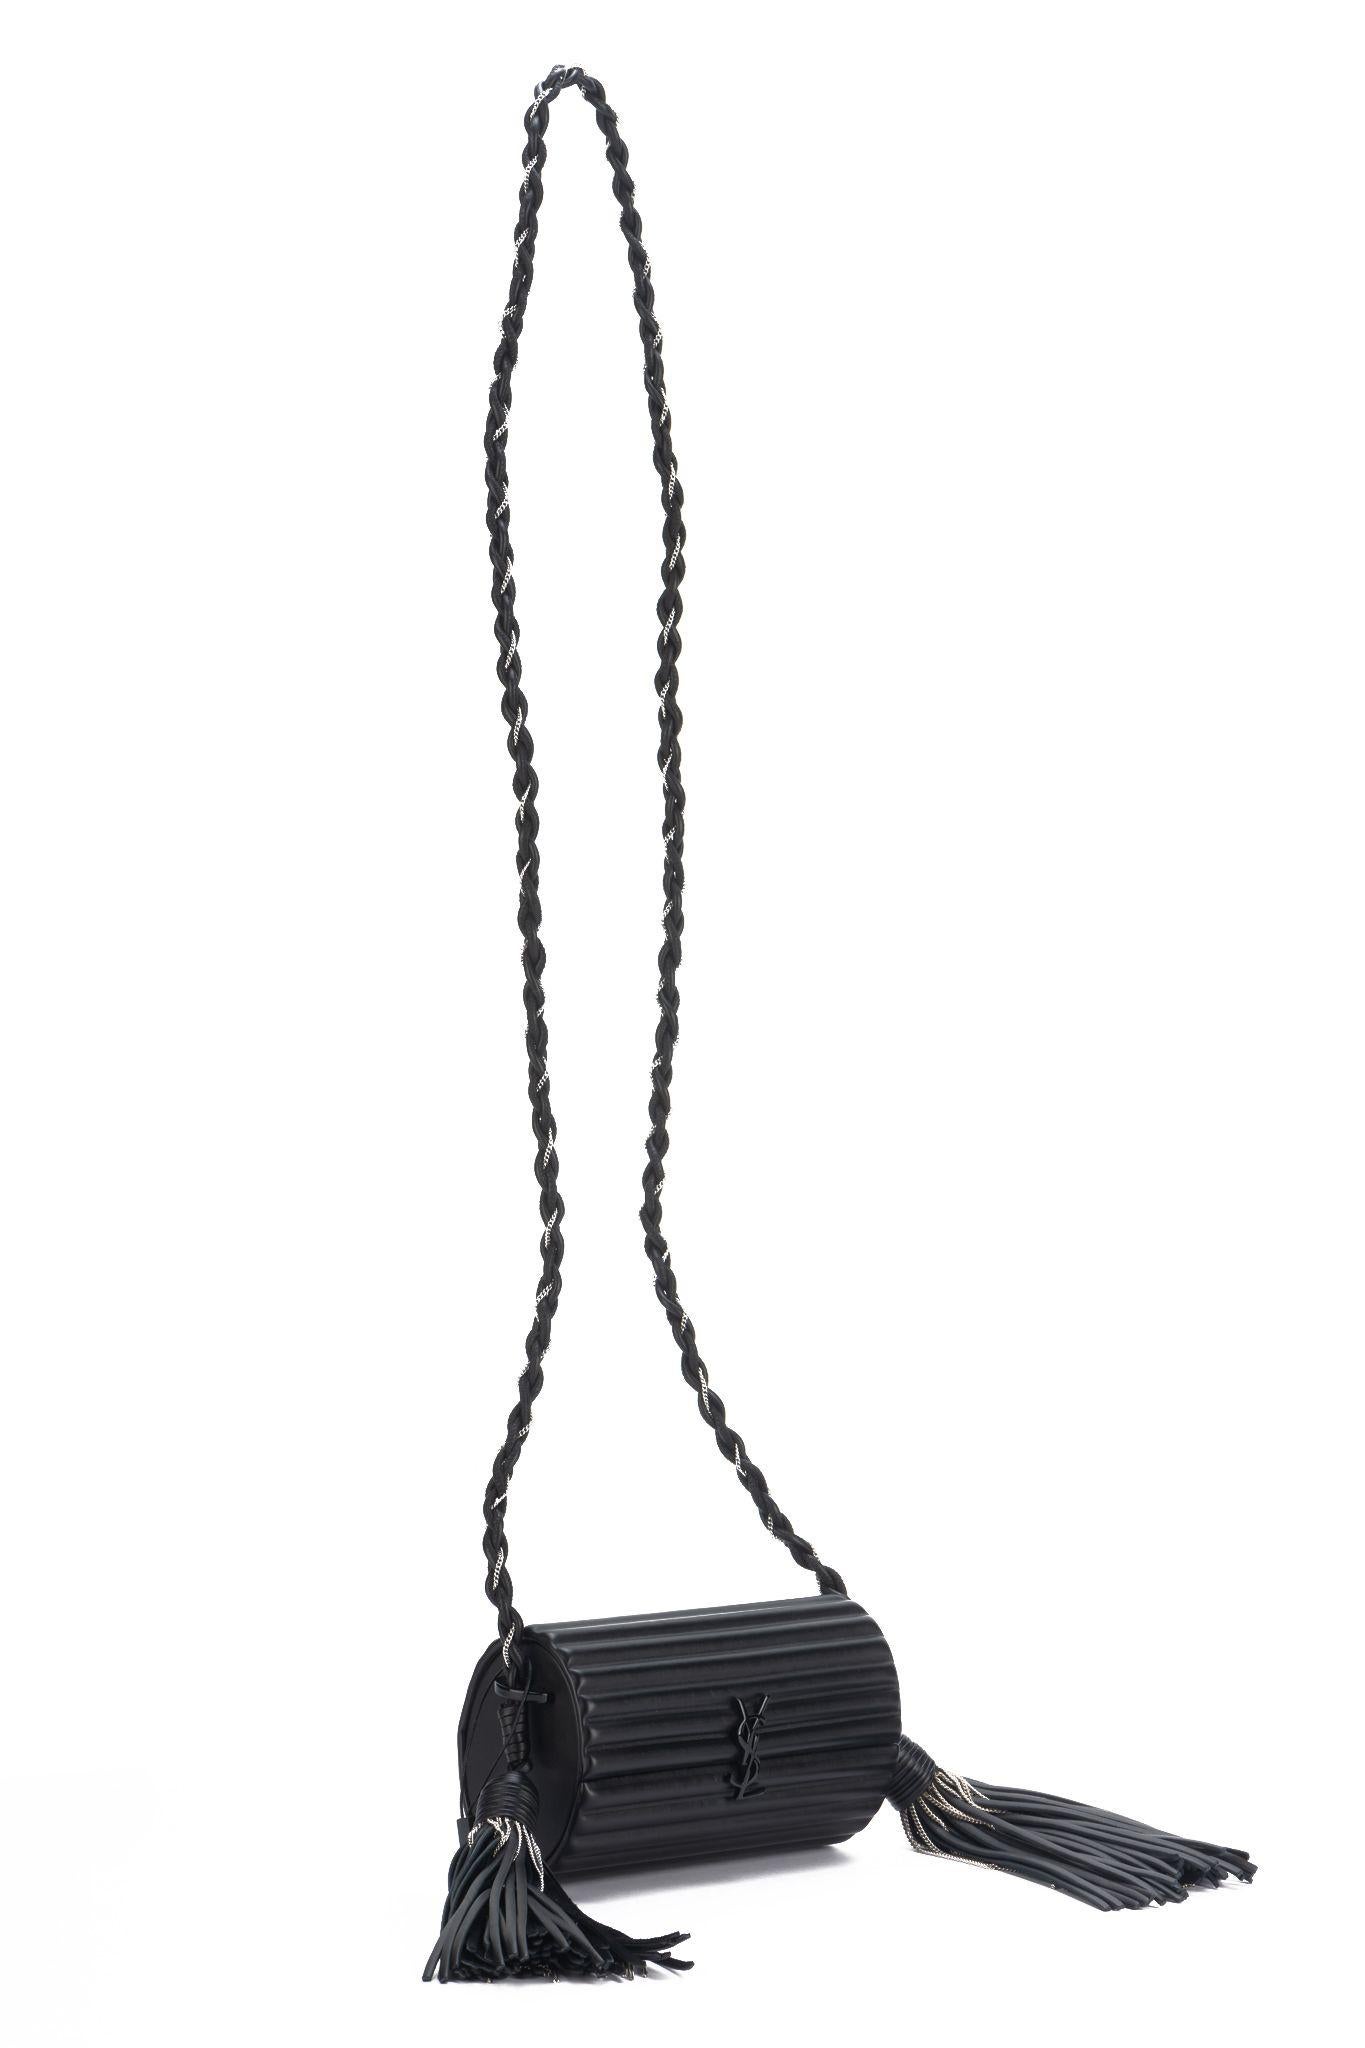 Yves Saint Laurent crossbody black leather ribbed barrel bag, two leather and gunmetal chain tassels. Shoulder drop 22.5”. Original price $2580. Comes with booklet and original dust cover.